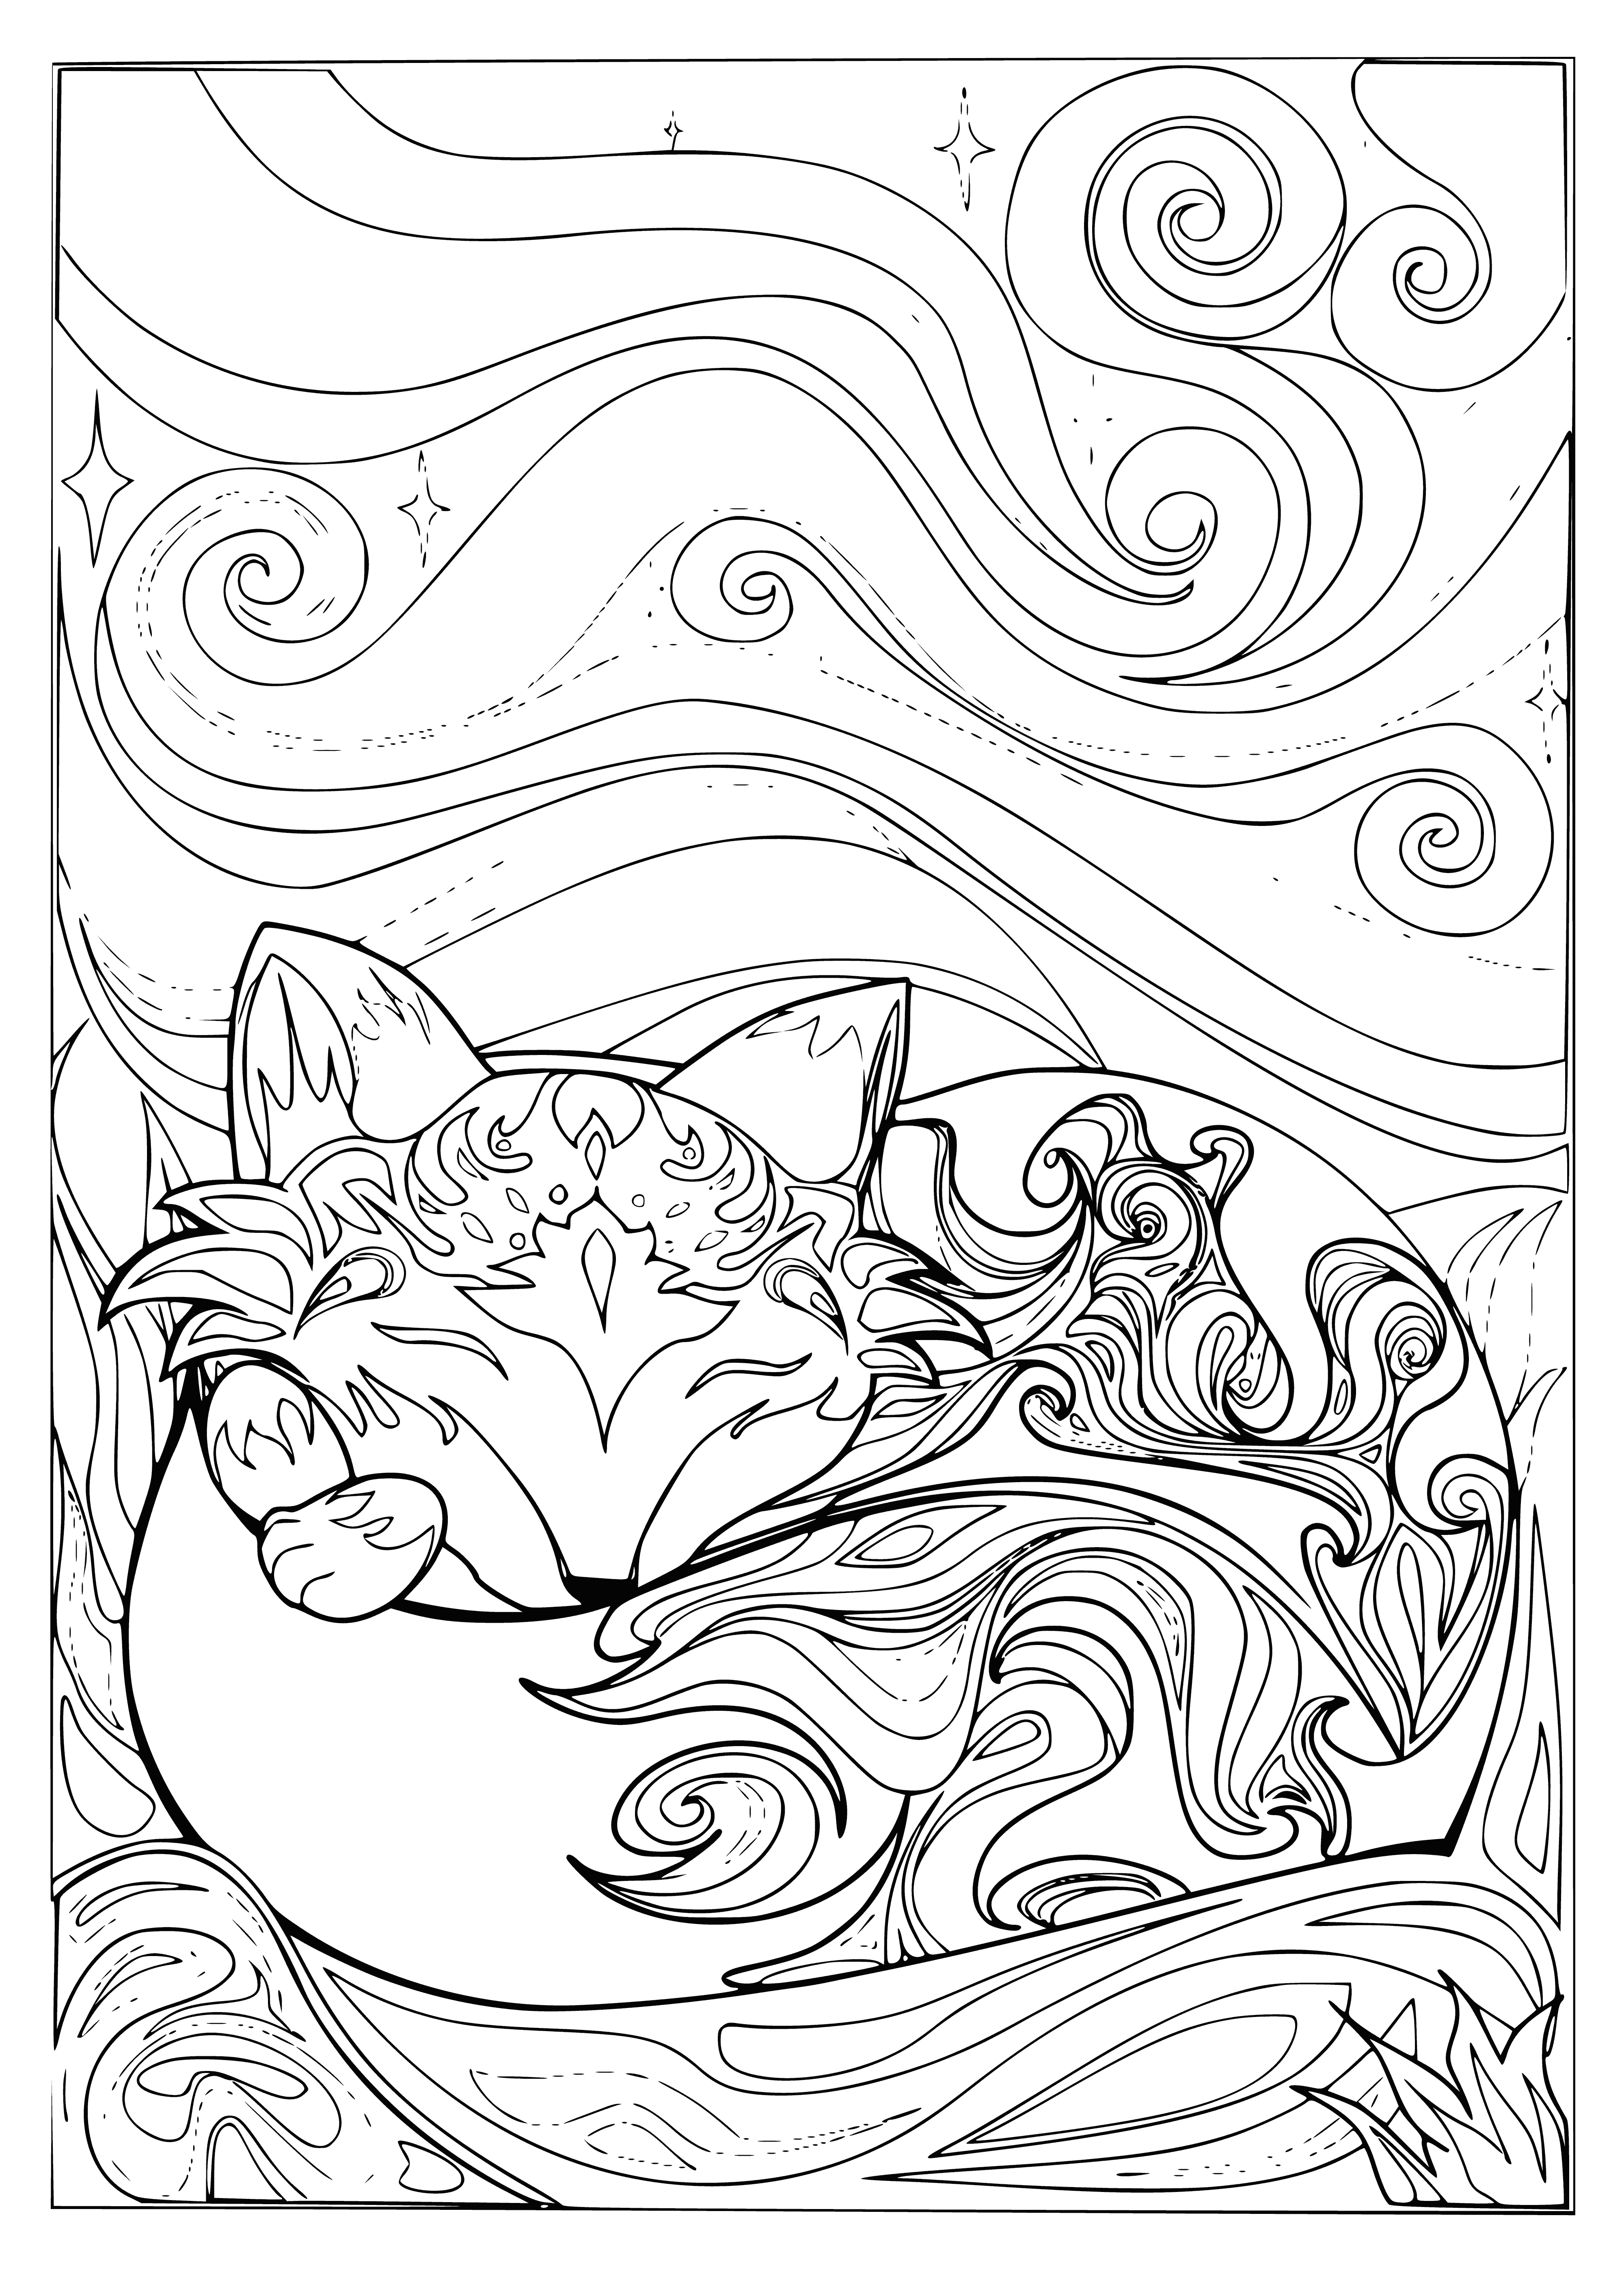 coloring page: A fox sleeps in a forest, resting its head on a paw. It's brown and white.